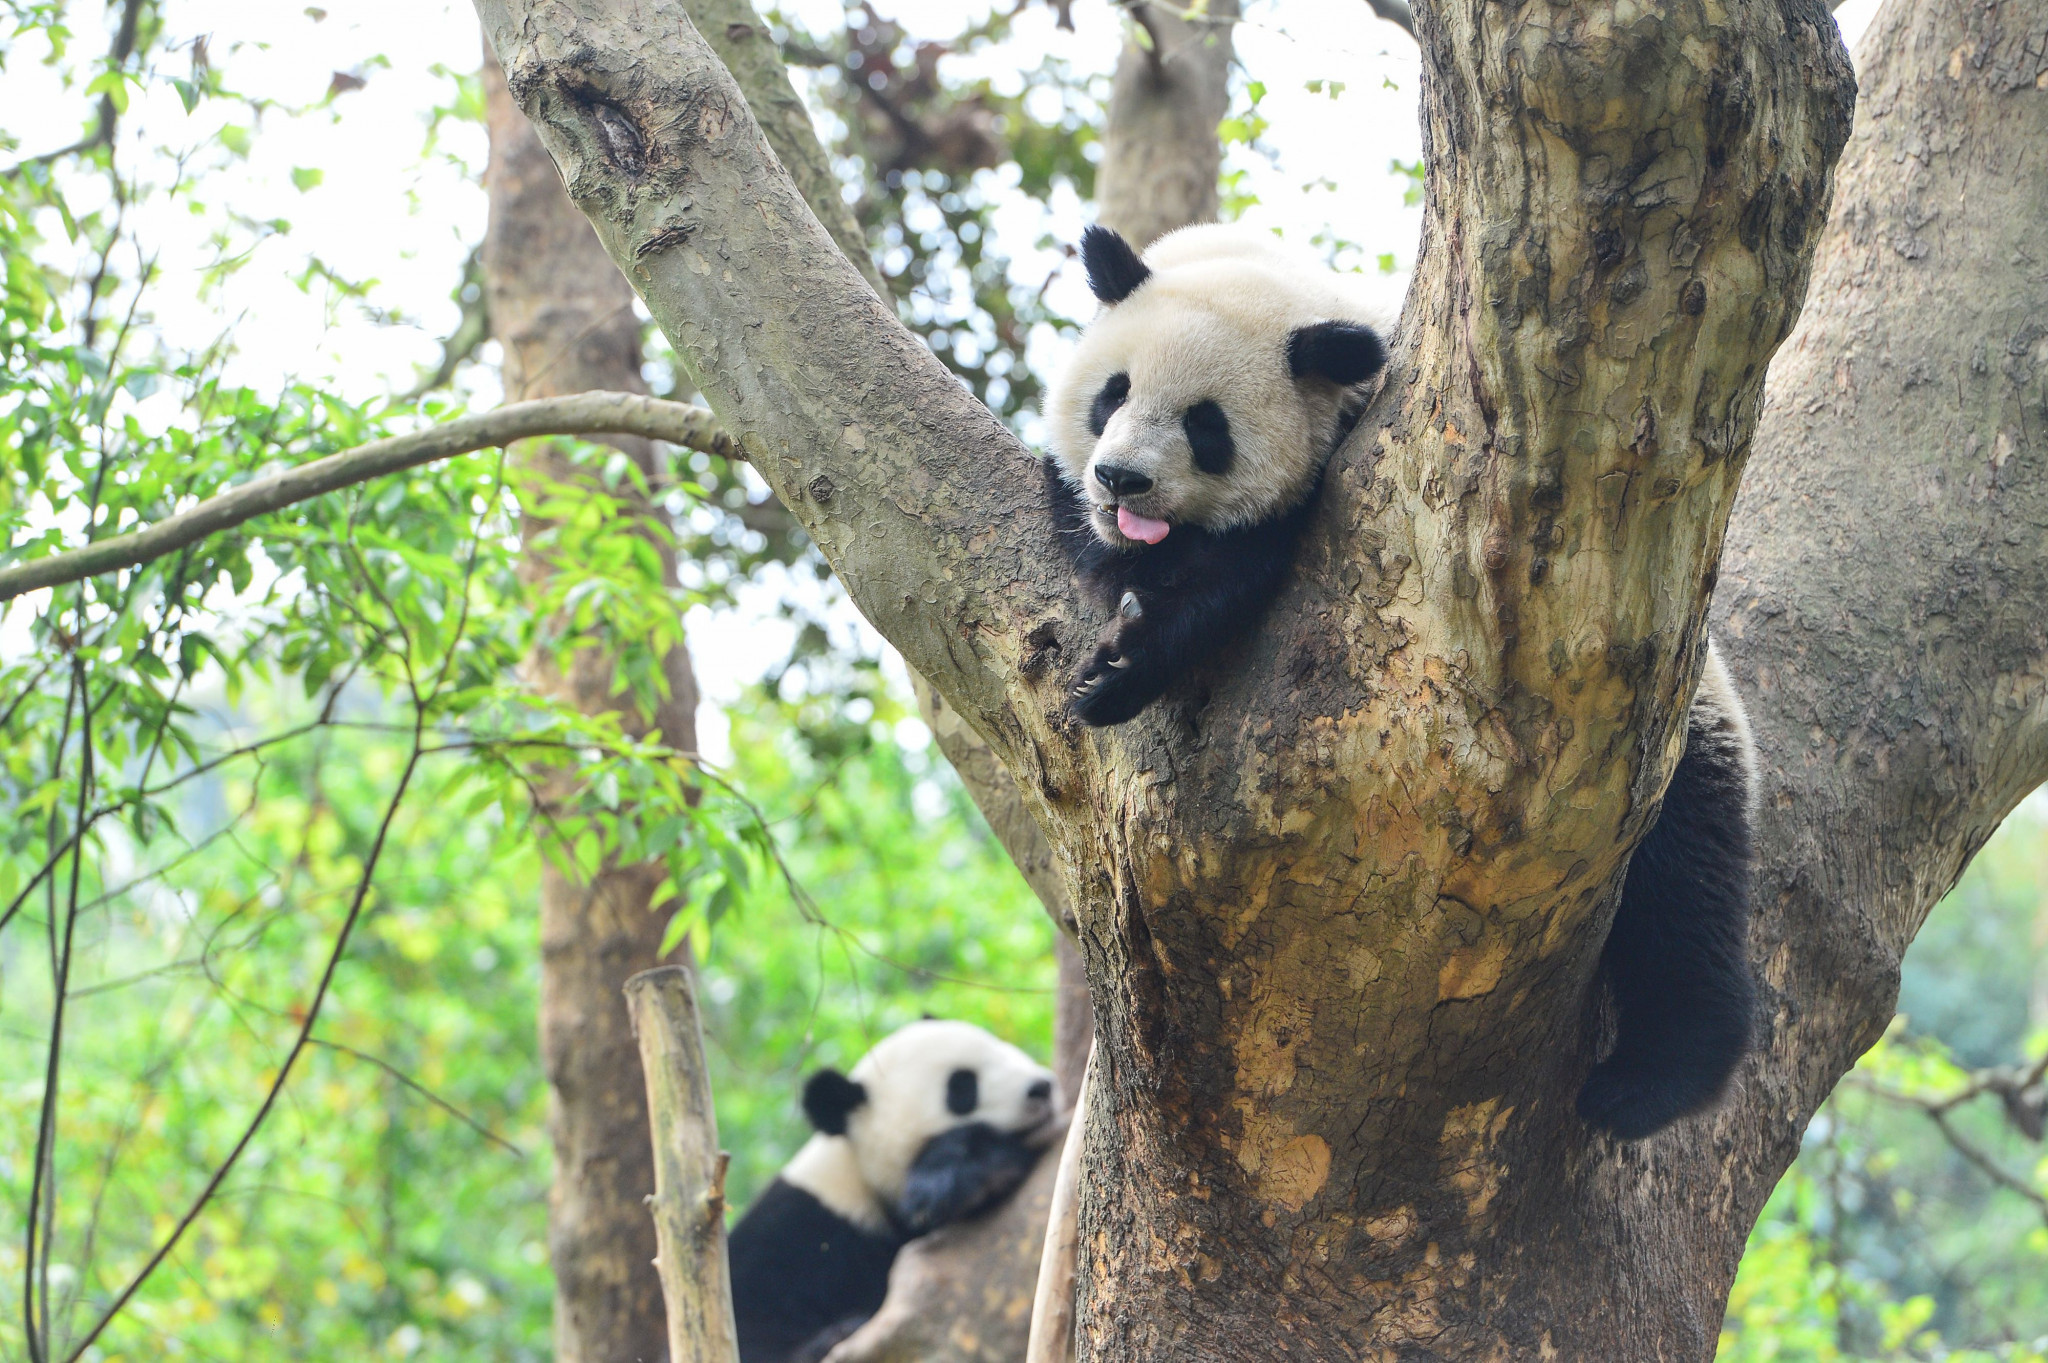 Chengdu Research Base of Giant Panda Breeding is one of the region's main tourist attractions ©Getty Images